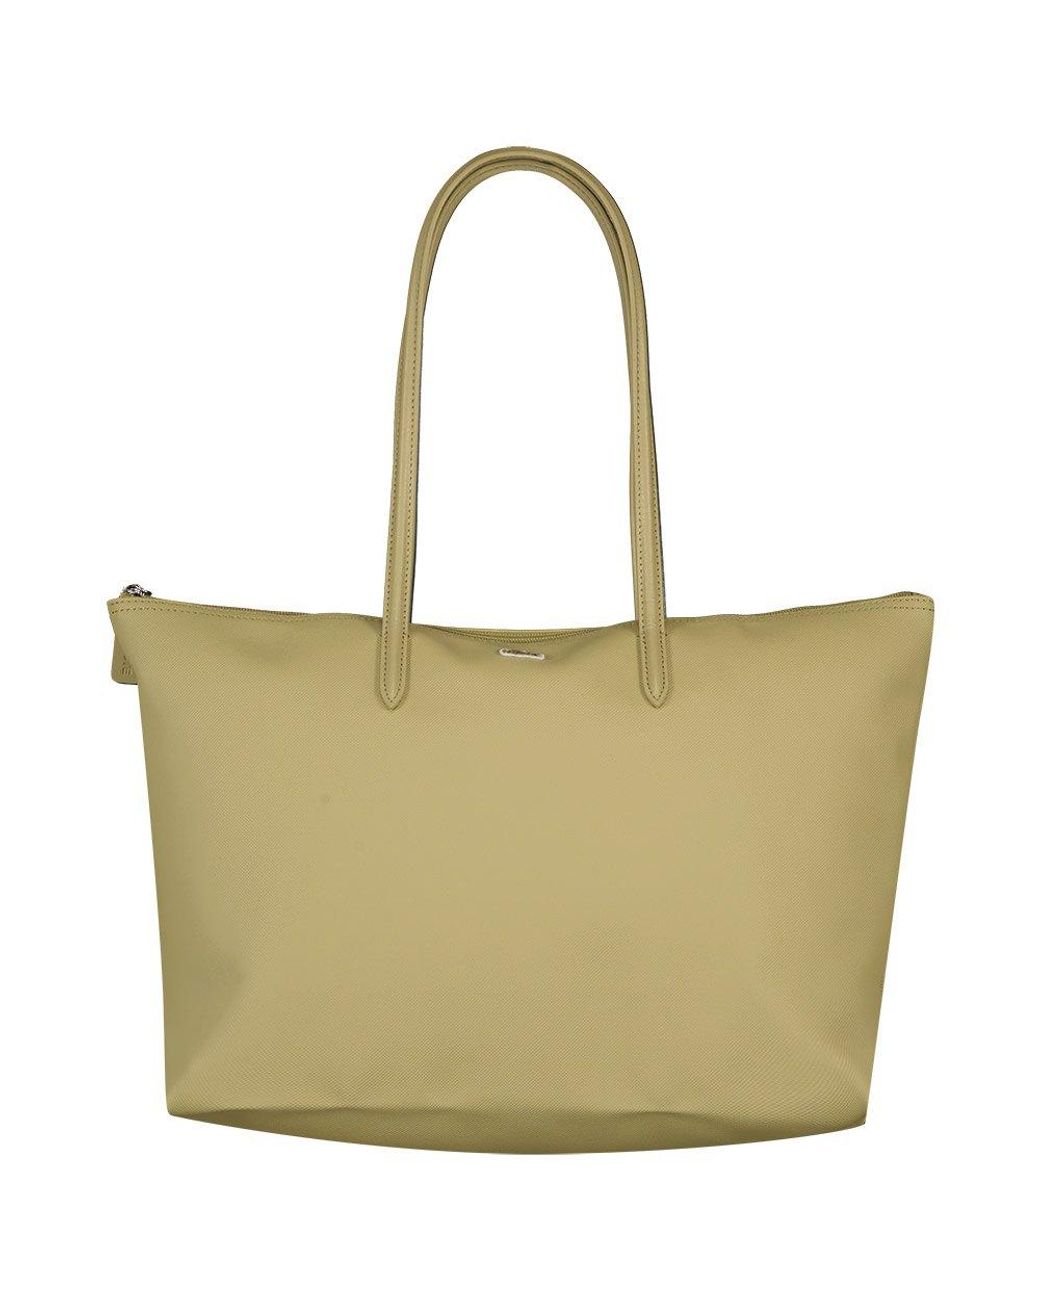 Lacoste Nf1888po Tote Bag in Green | Lyst